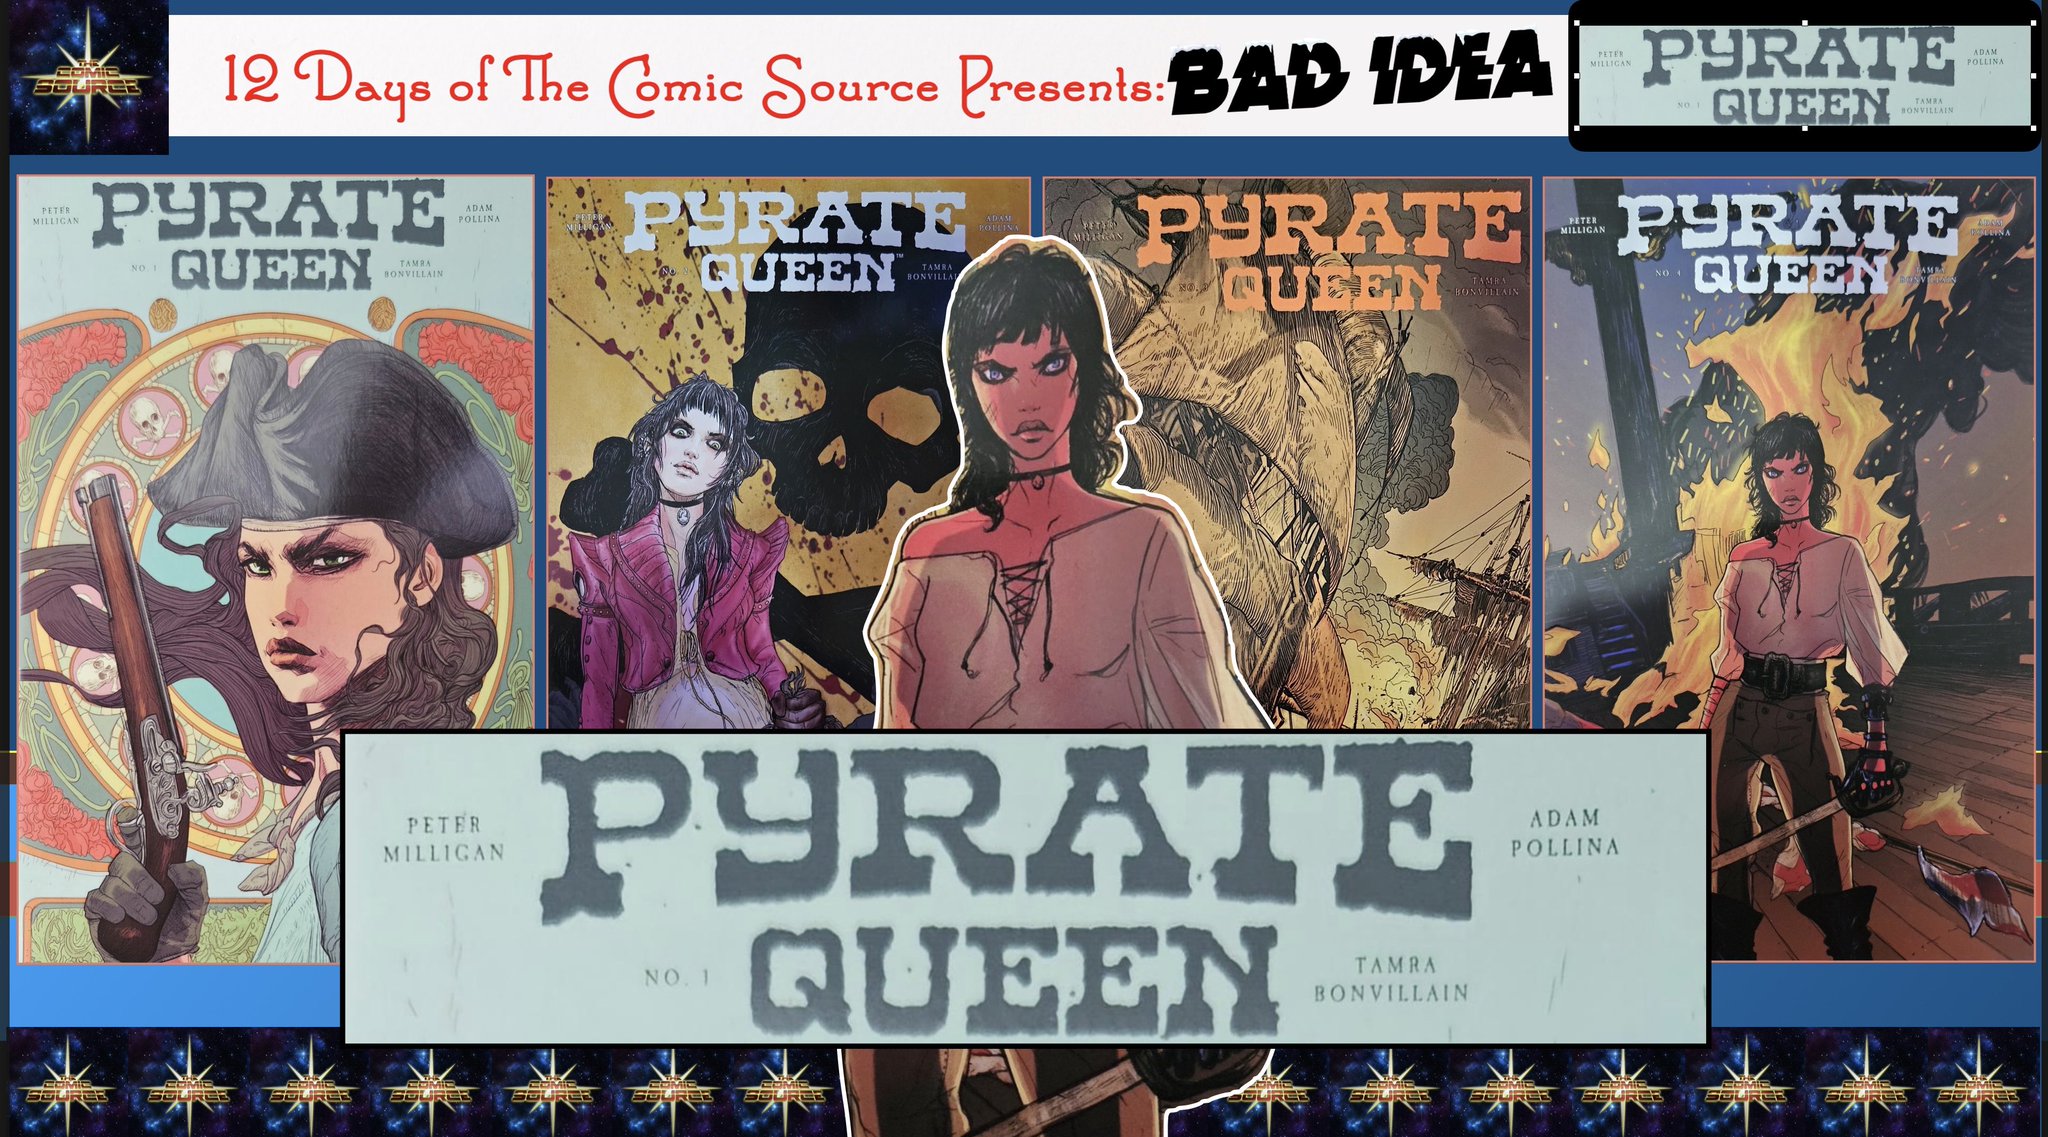 12 Days of The Comic Source Presents: Bad Idea – Pyrate Queen Spotlight